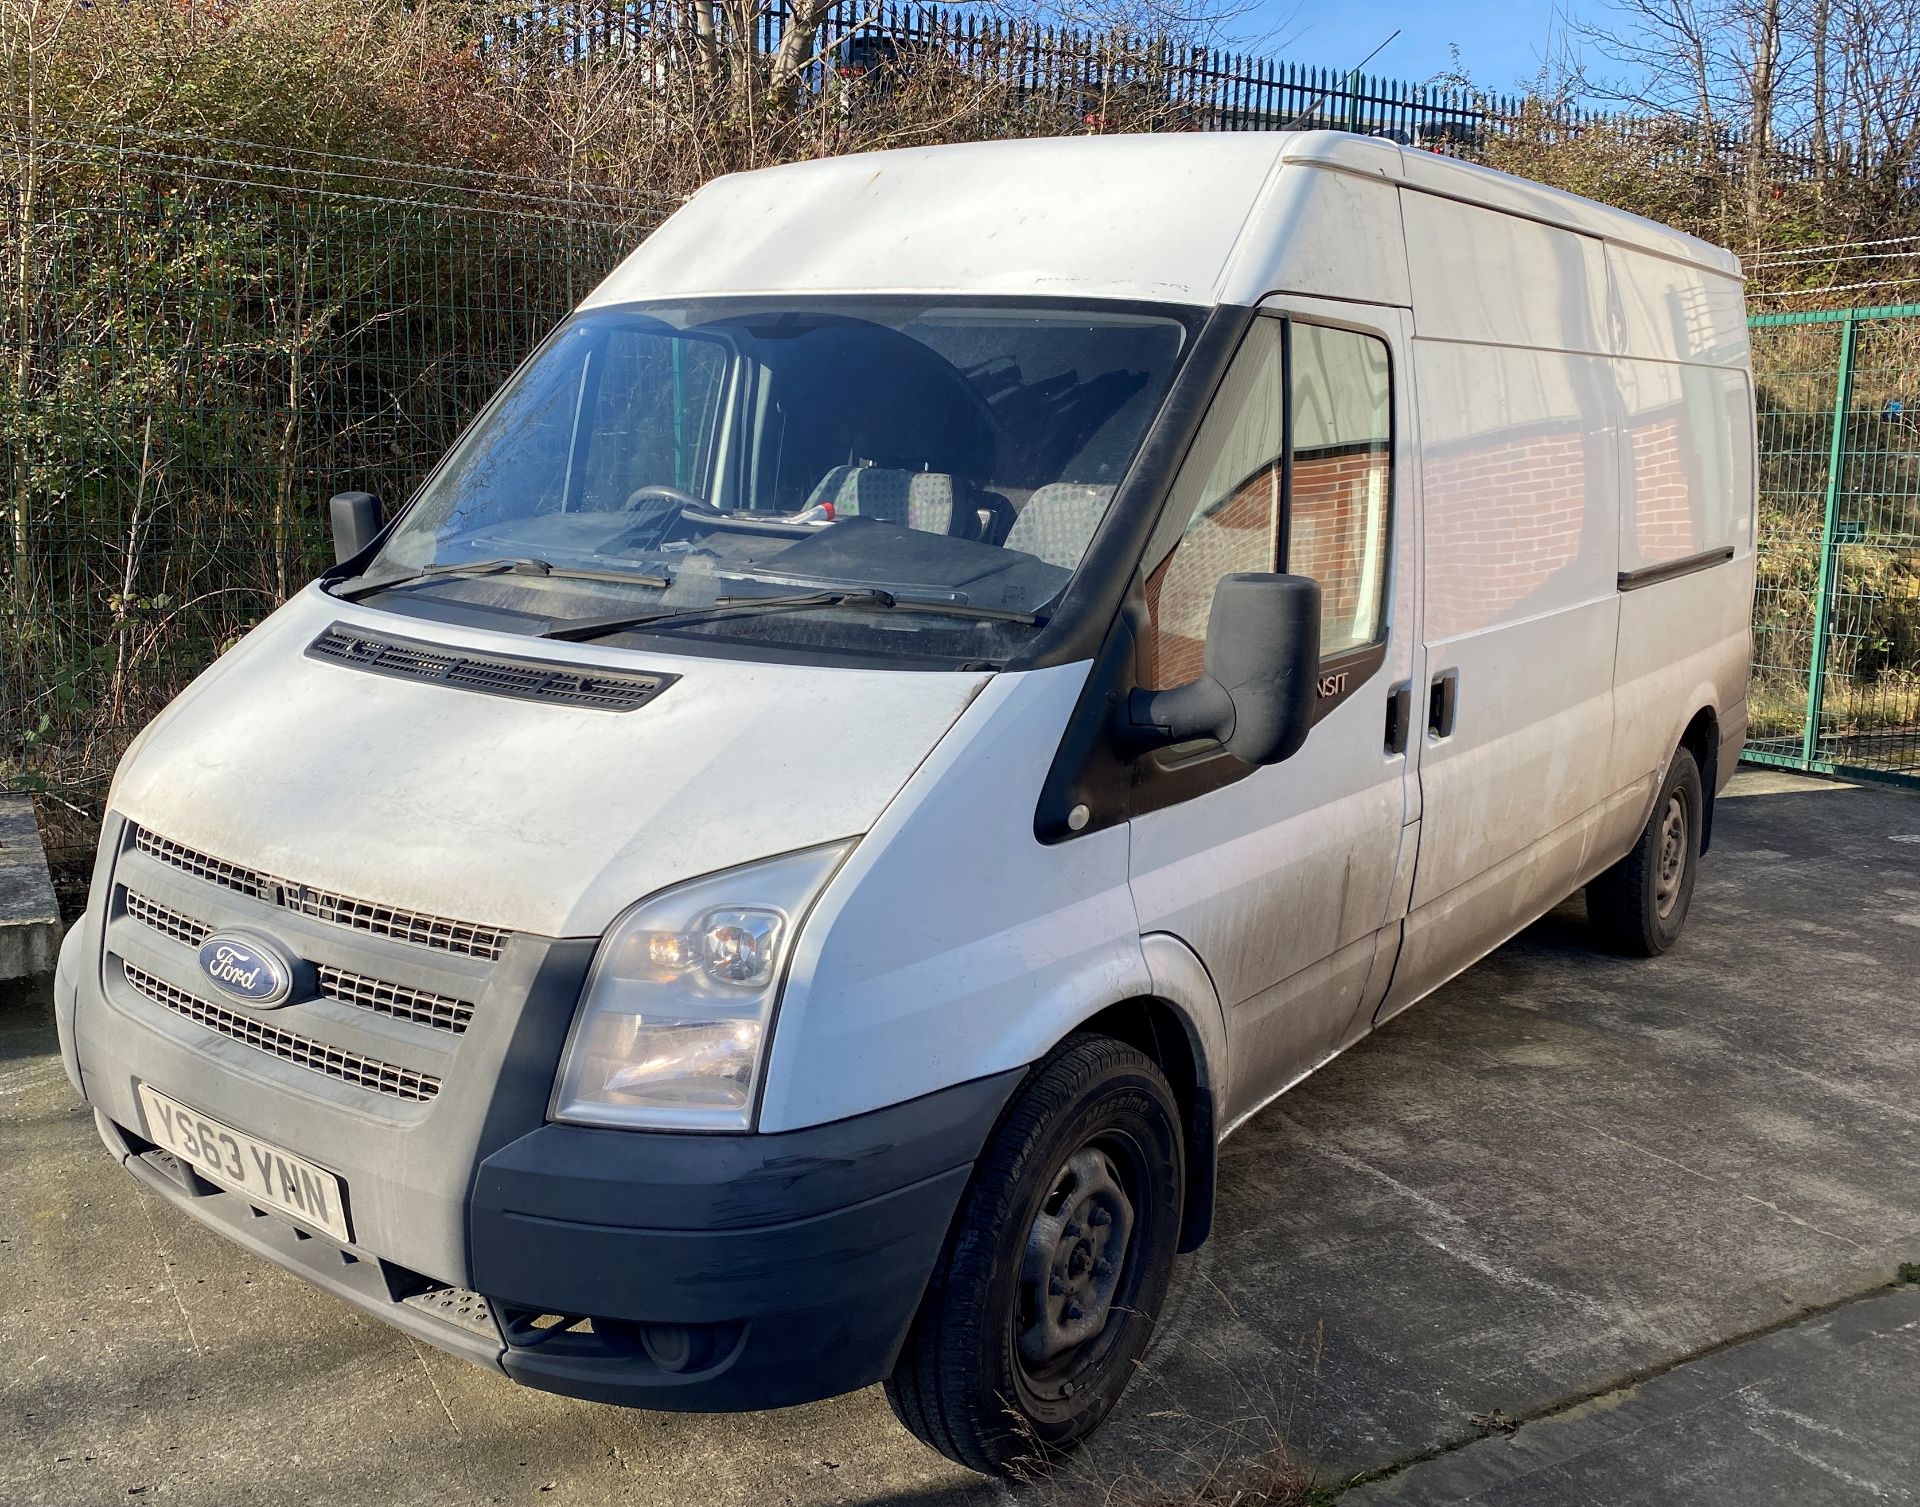 FORD TRANSIT T280 DURATORQ PANEL VAN (listed on HPI as a 125 T350 FWD) - Diesel - White.